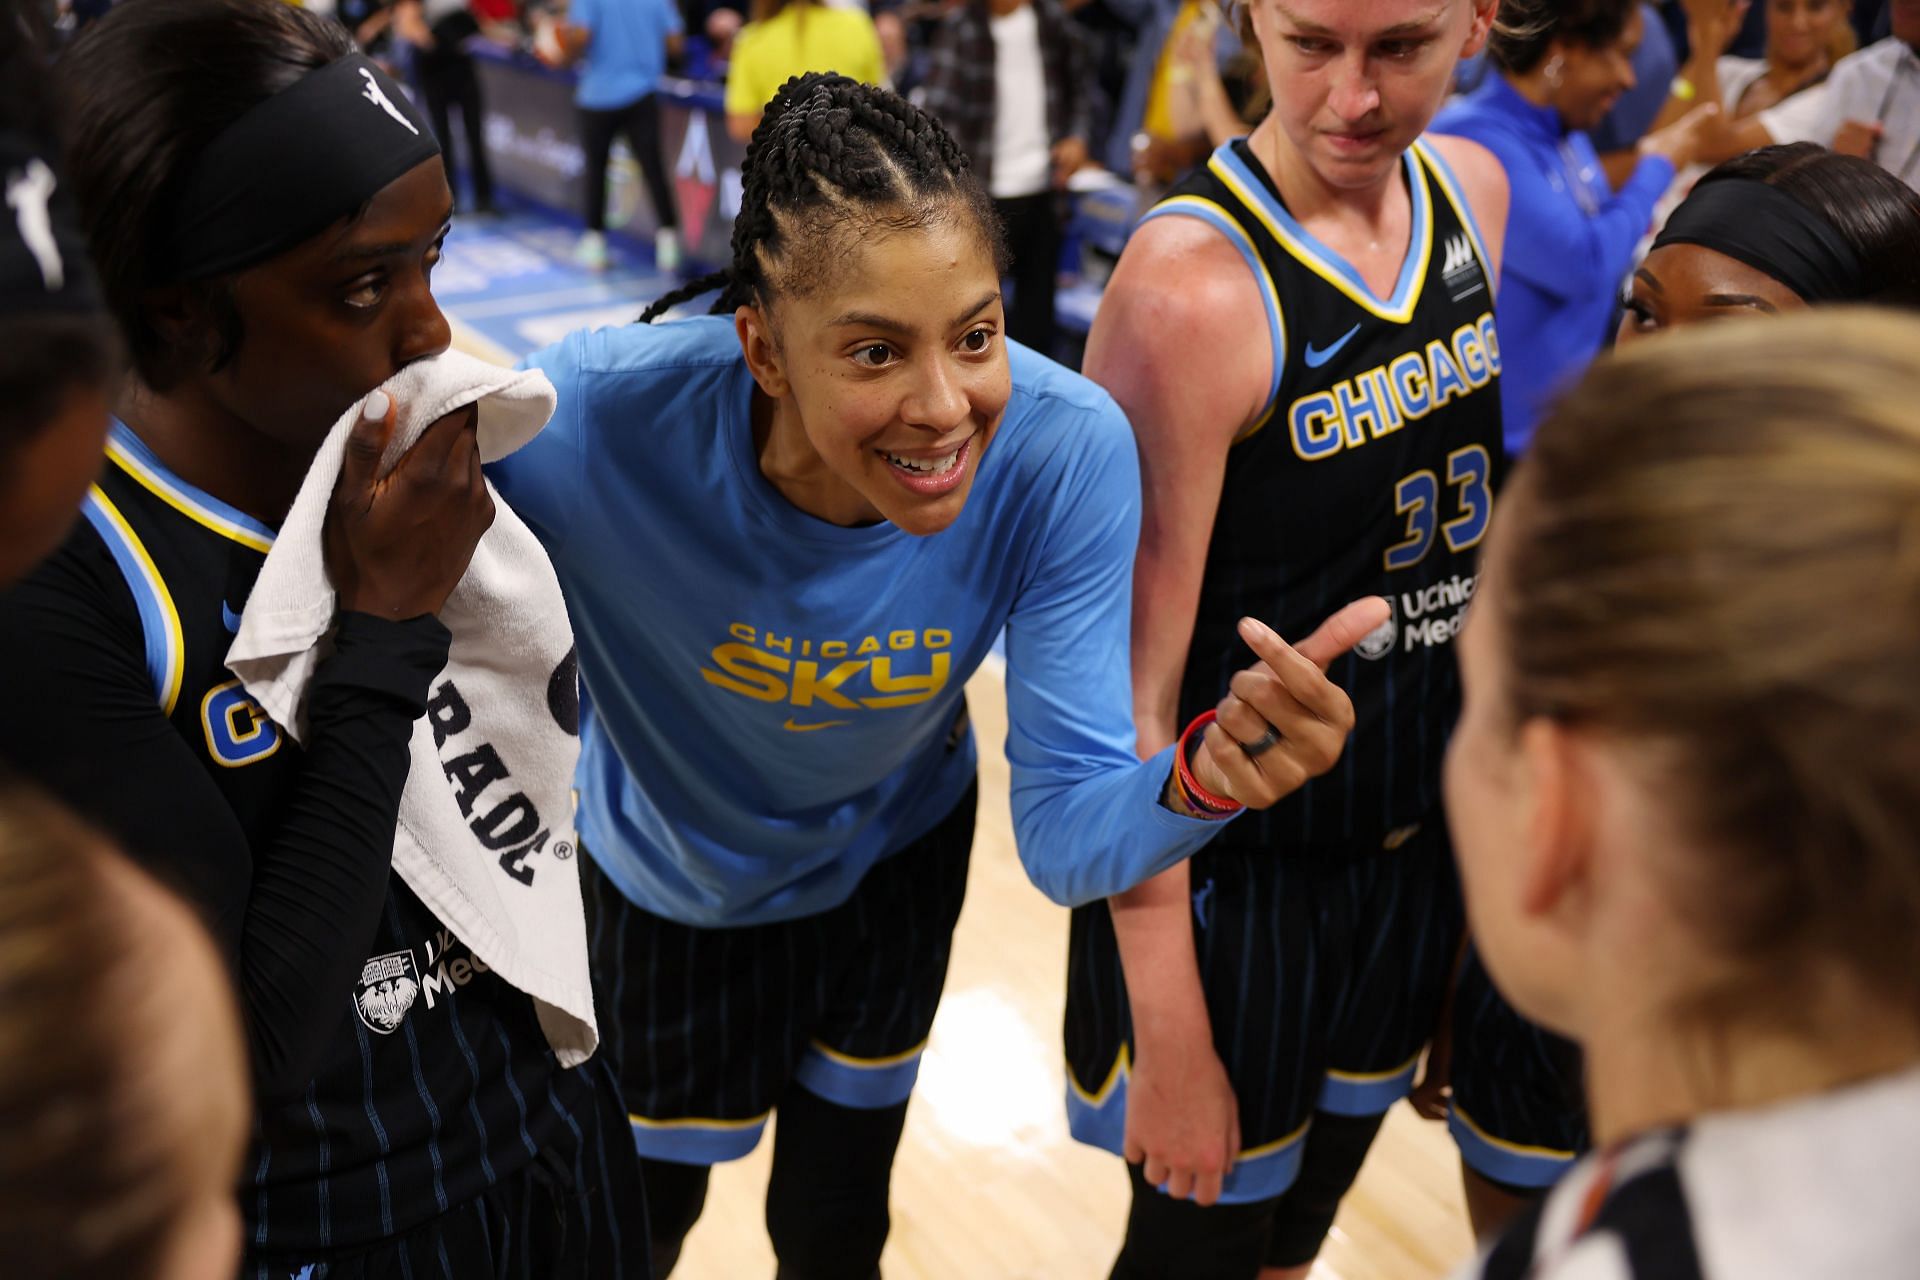 WNBA Star Candace Parker on Her Continued Collaboration With Adidas